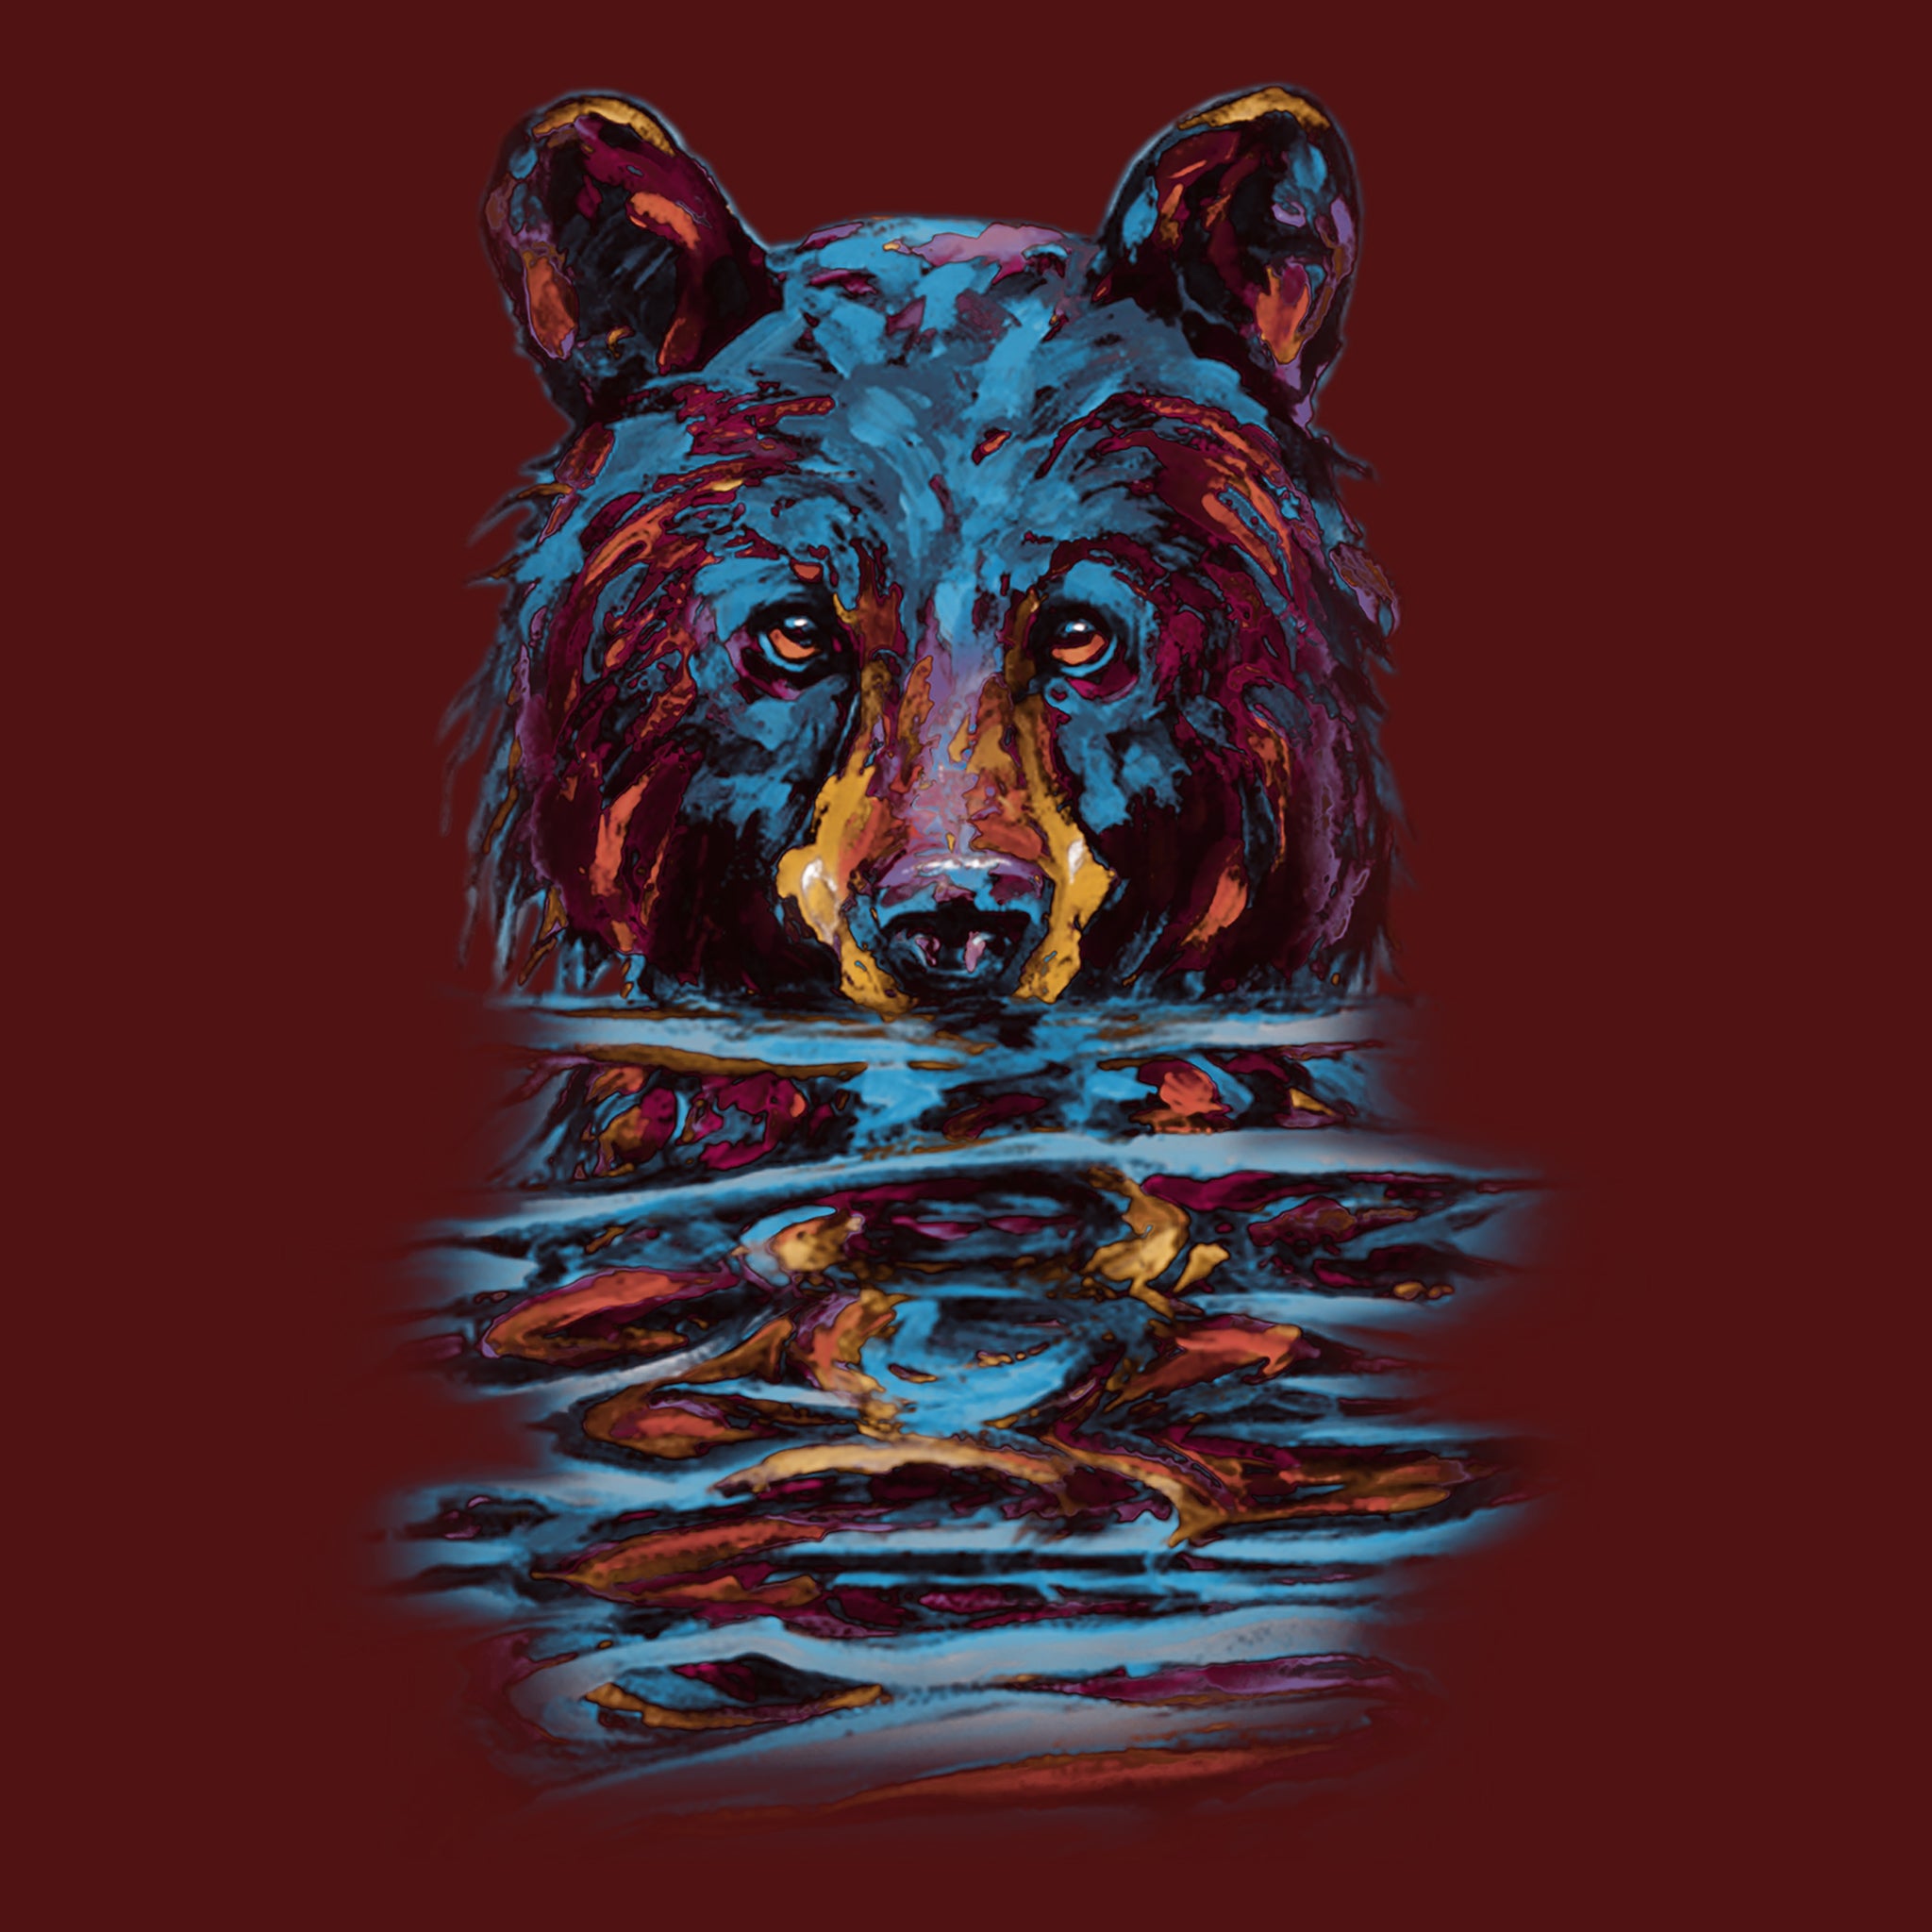 Very Wet Bear by Kari Lehr - painting of a colorful black bear emerging from water